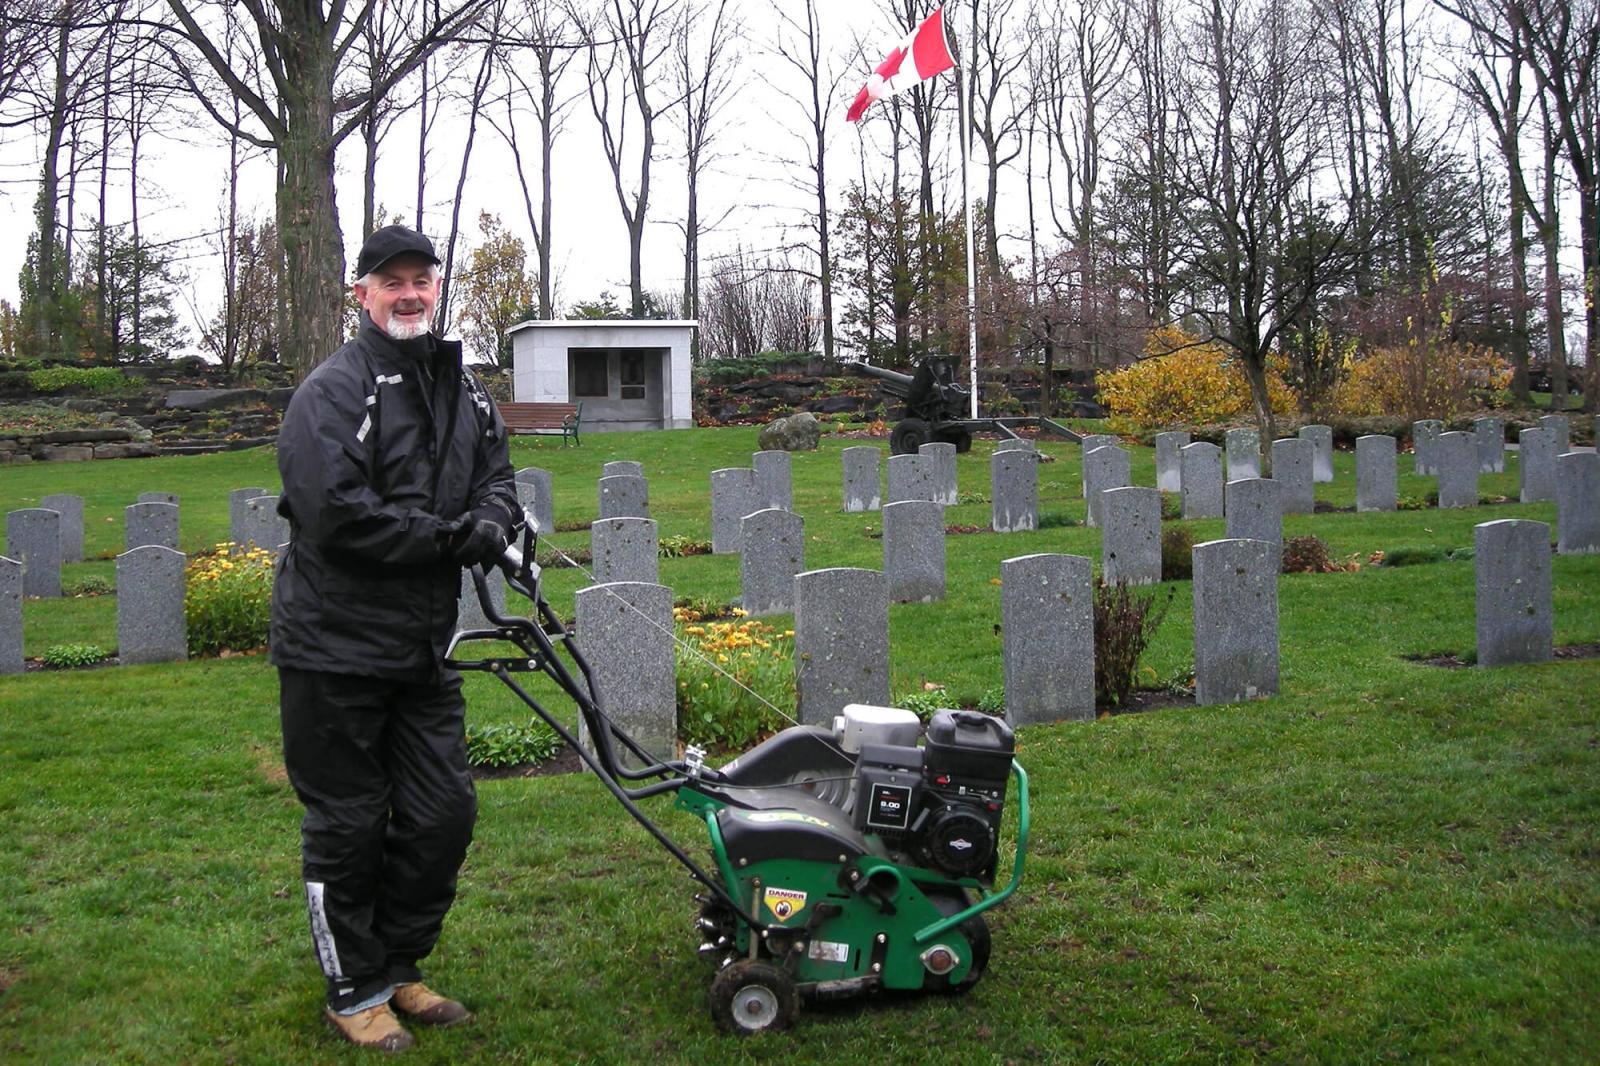 Taking part in the Day of Tribute, John Brand from Green Unlimited, said, “The men and women here paid the ultimate price to ensure our safety and freedom, and deserve a well maintained final resting place; this is one small way that our landscaping community can provide this along with our respect, admiration and thanks.”